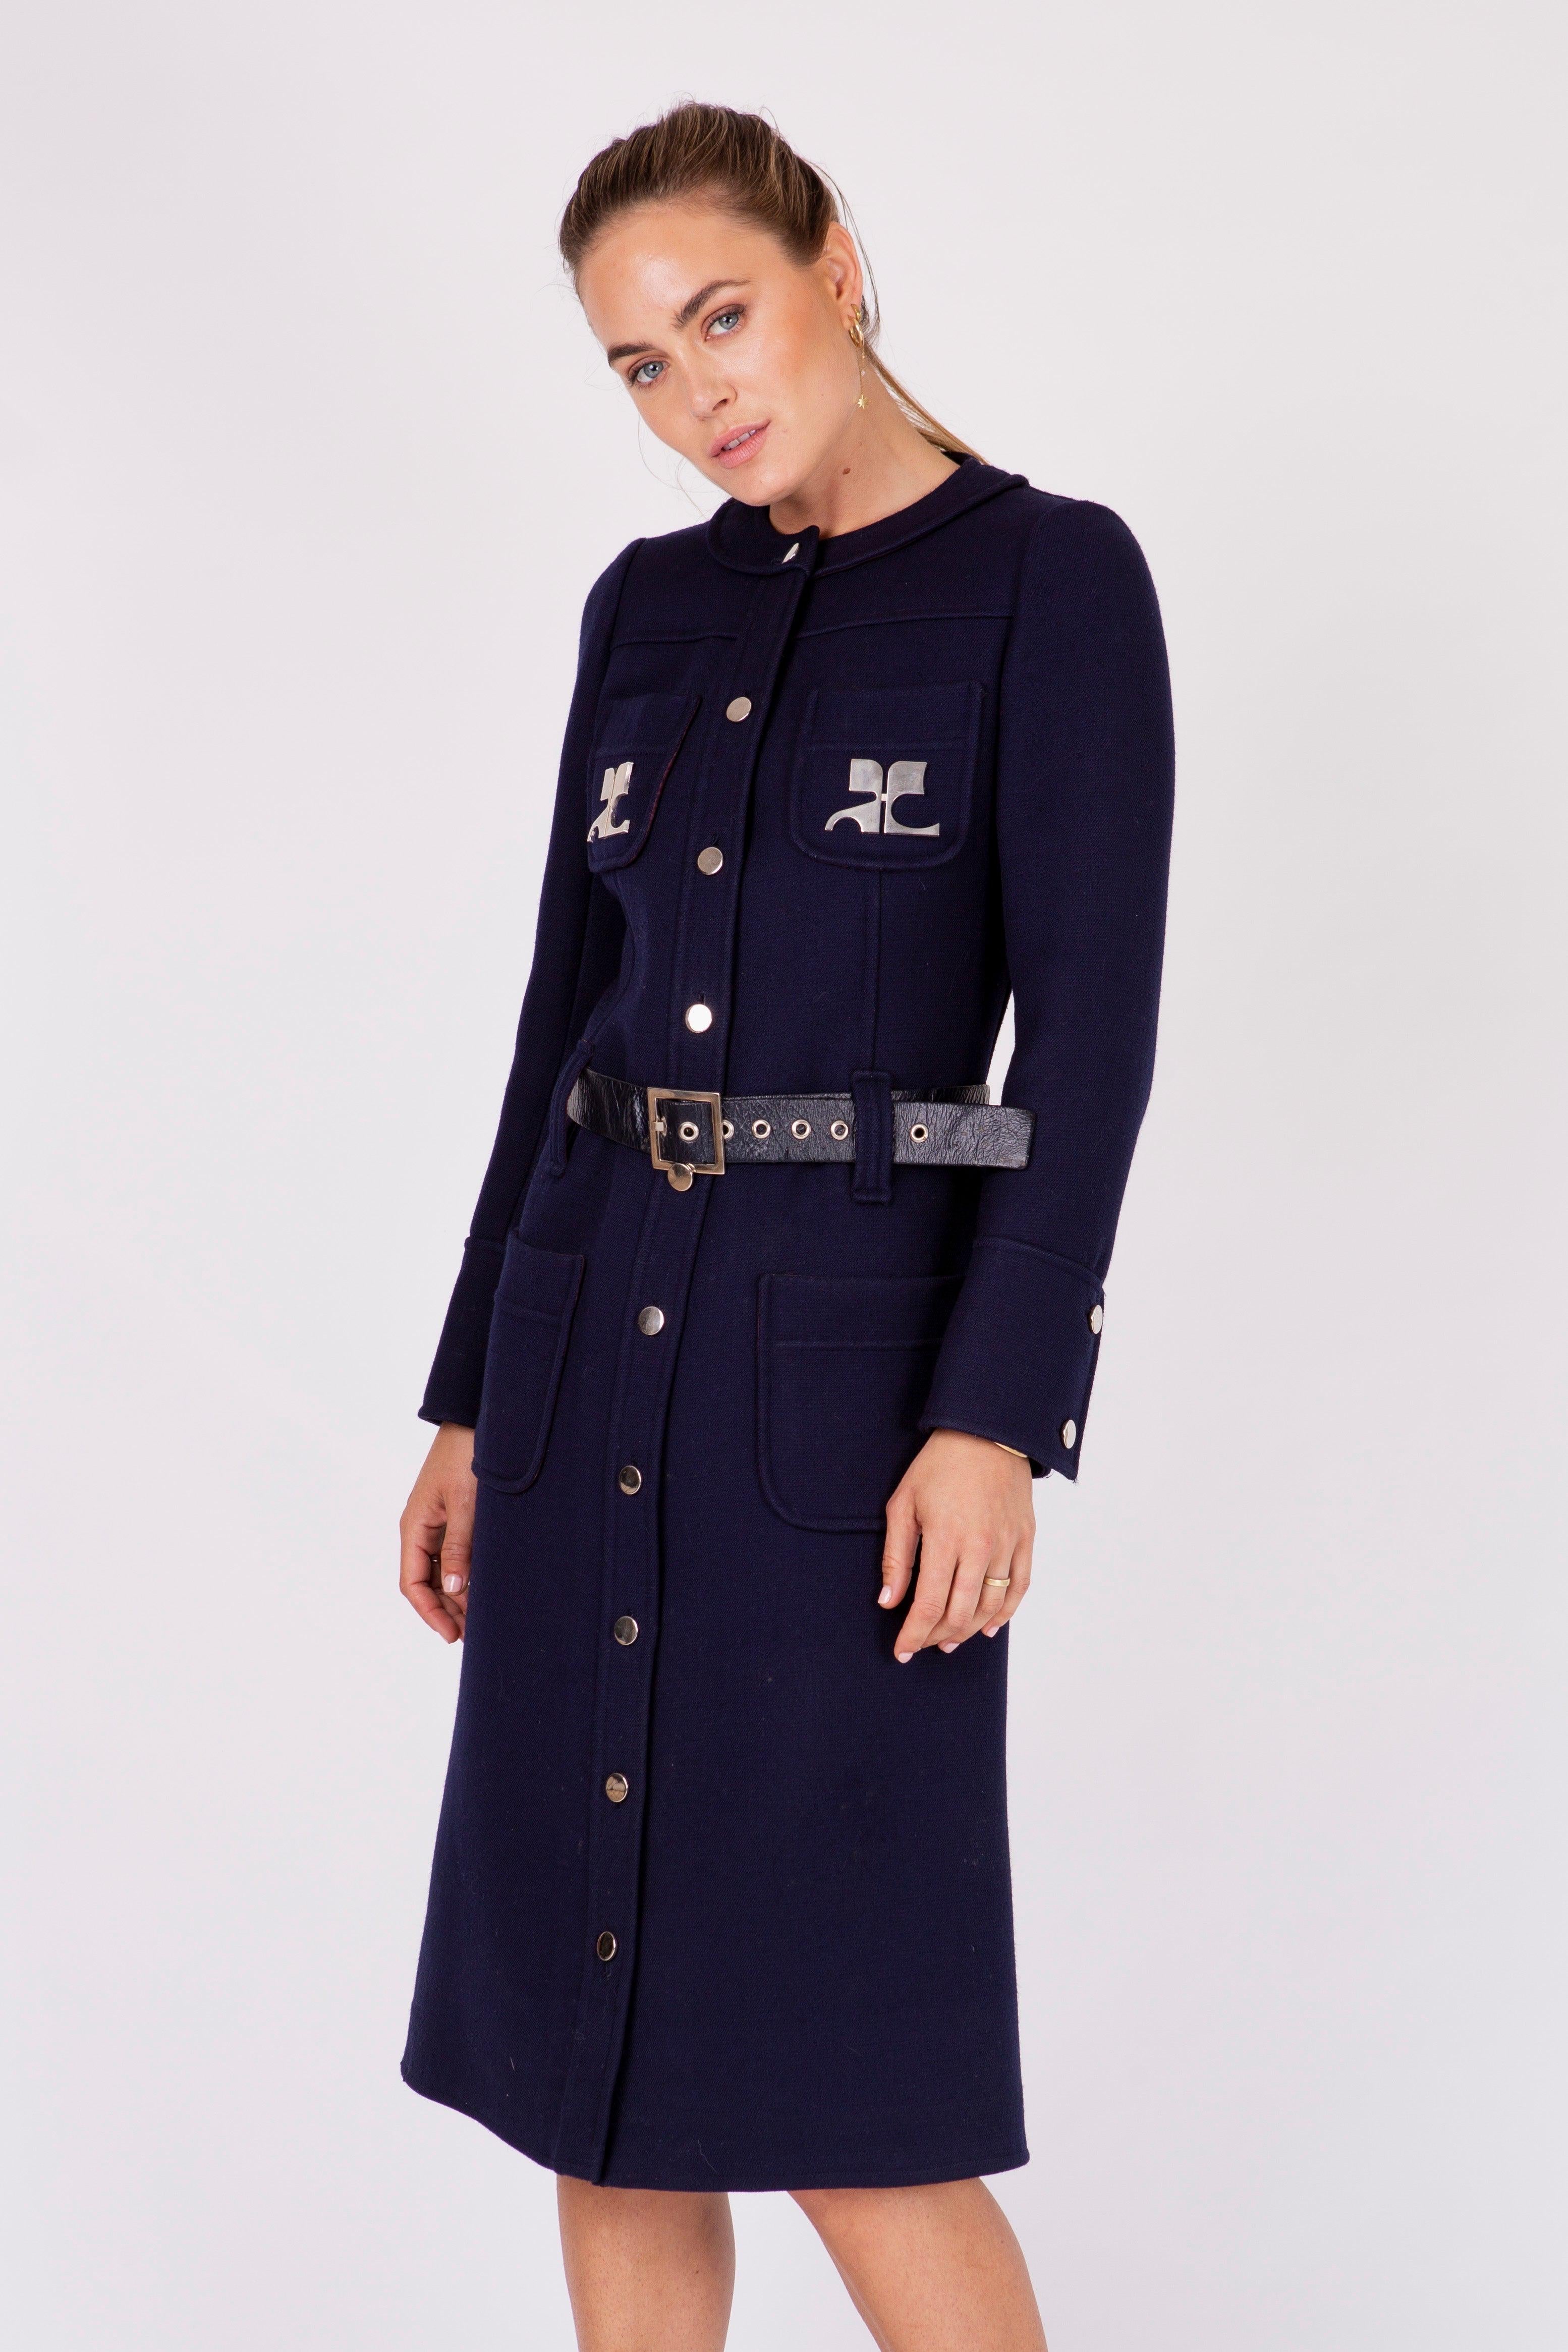 Dating to the 60's, this incredible Courreges coat is a numbered couture piece made of navy wool with two large silver metal logos on each breast pocket, a vinyl belt and silver buttons & belt hardware. Extremely heavy & substantial, this is